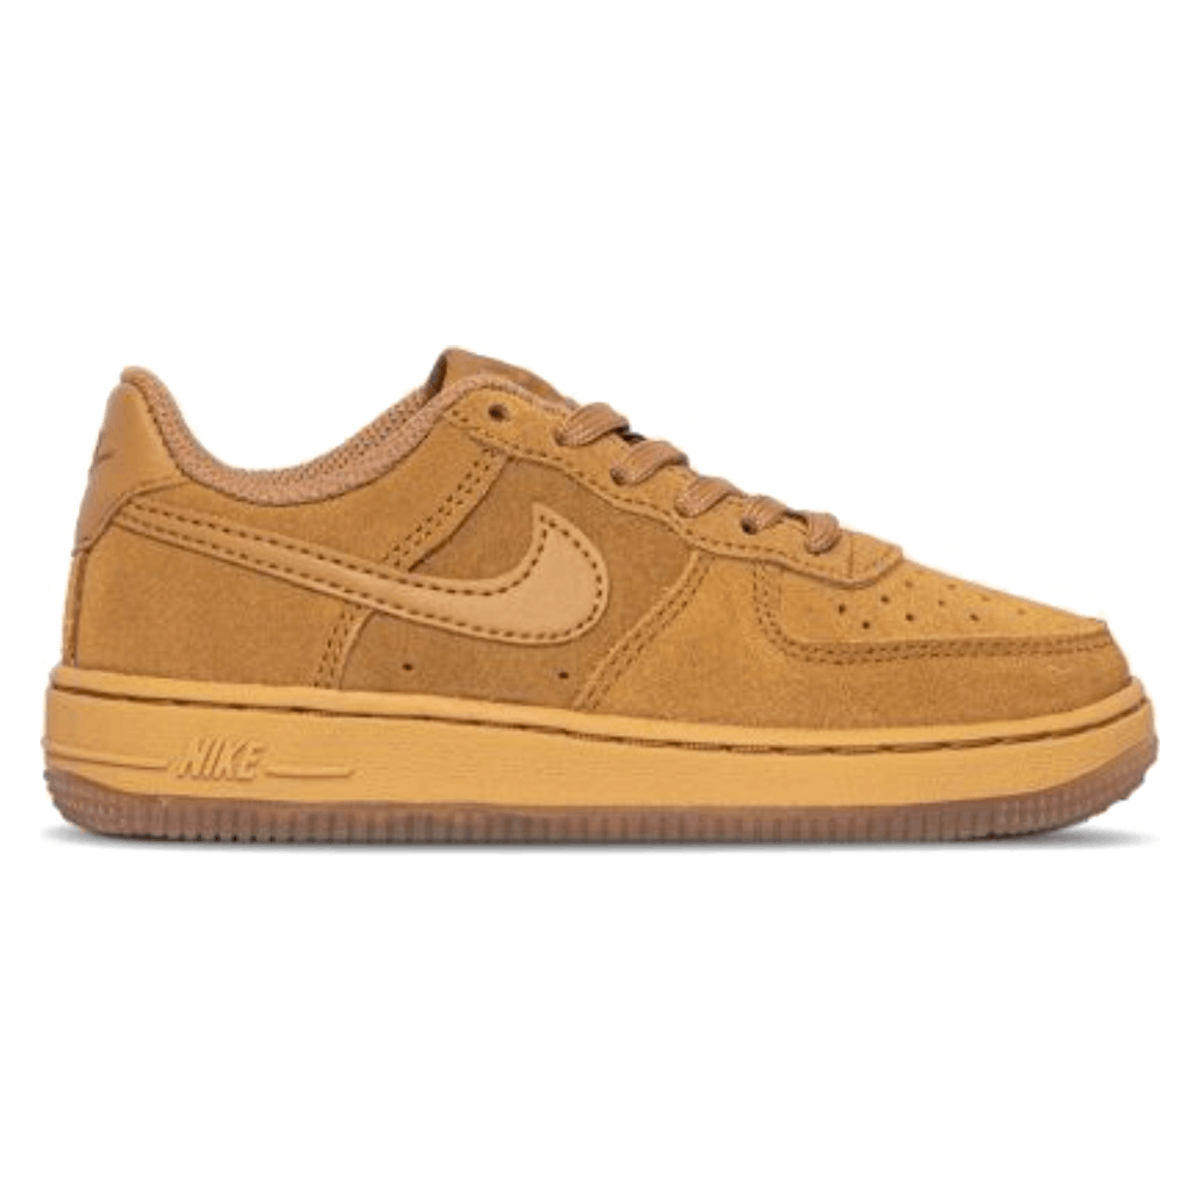 Nike Air Force 1 Low LV8 3 Wheat (PS)